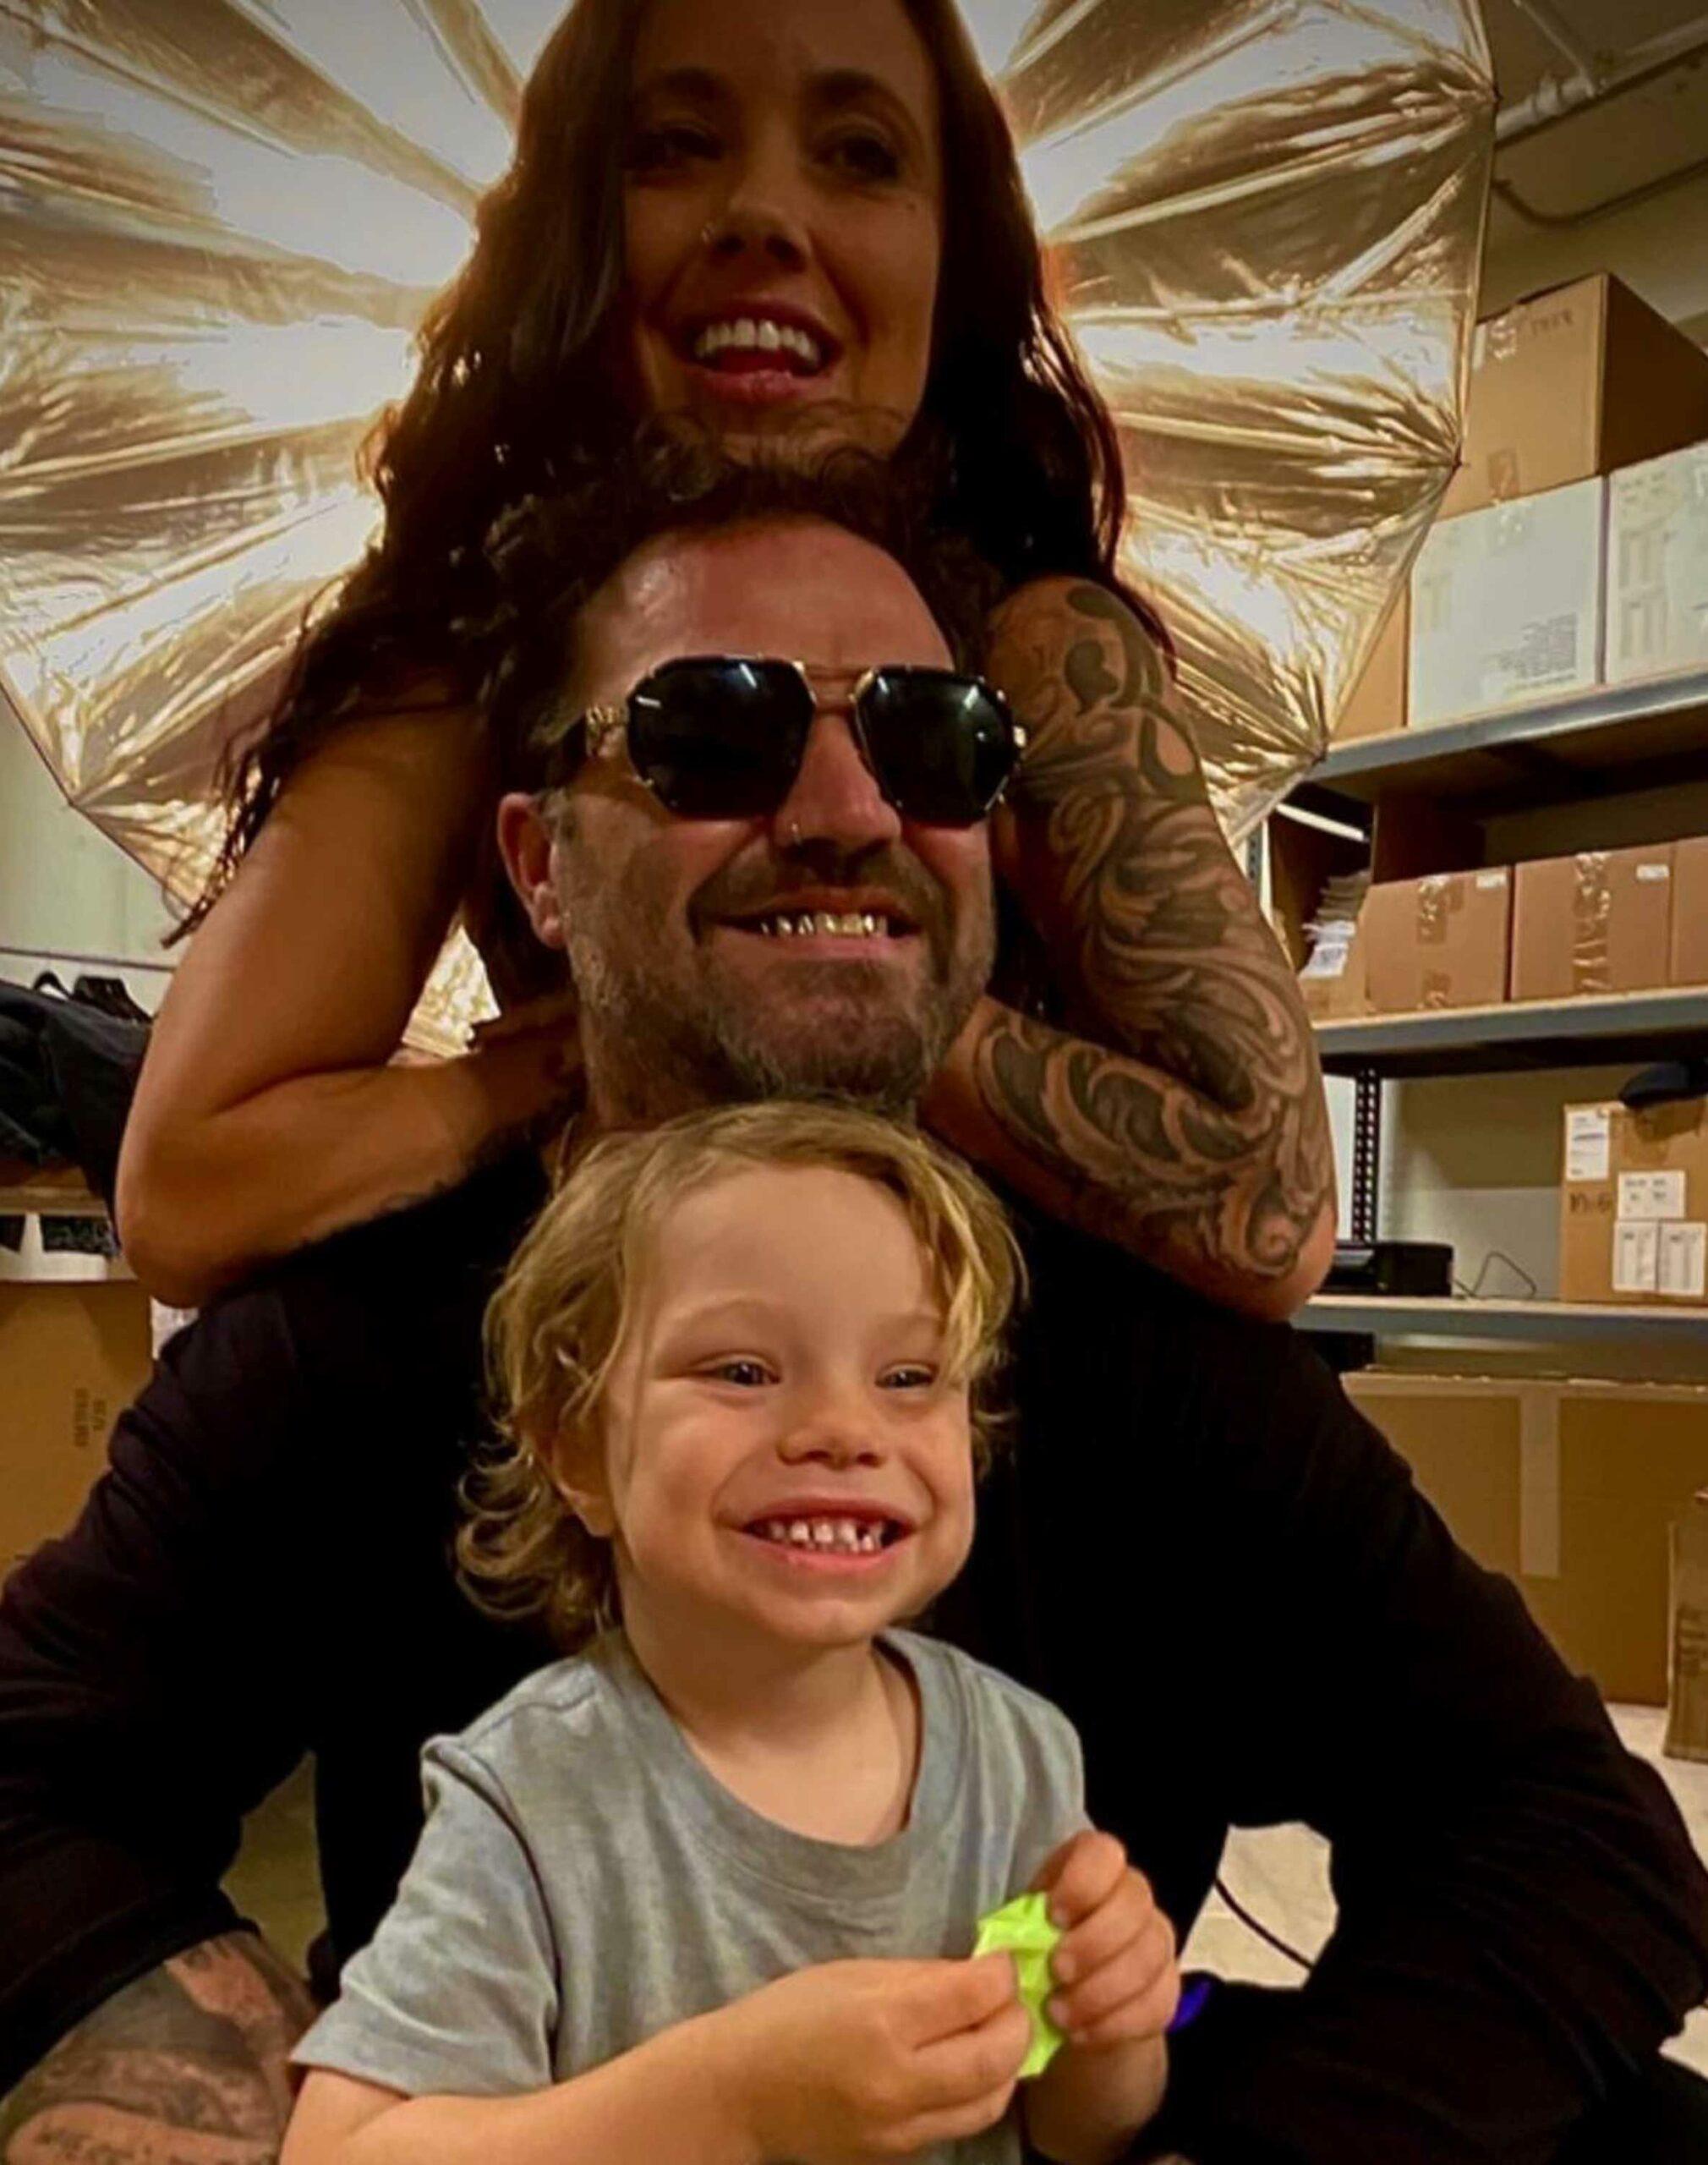 Bam Margera, his wife, and son.